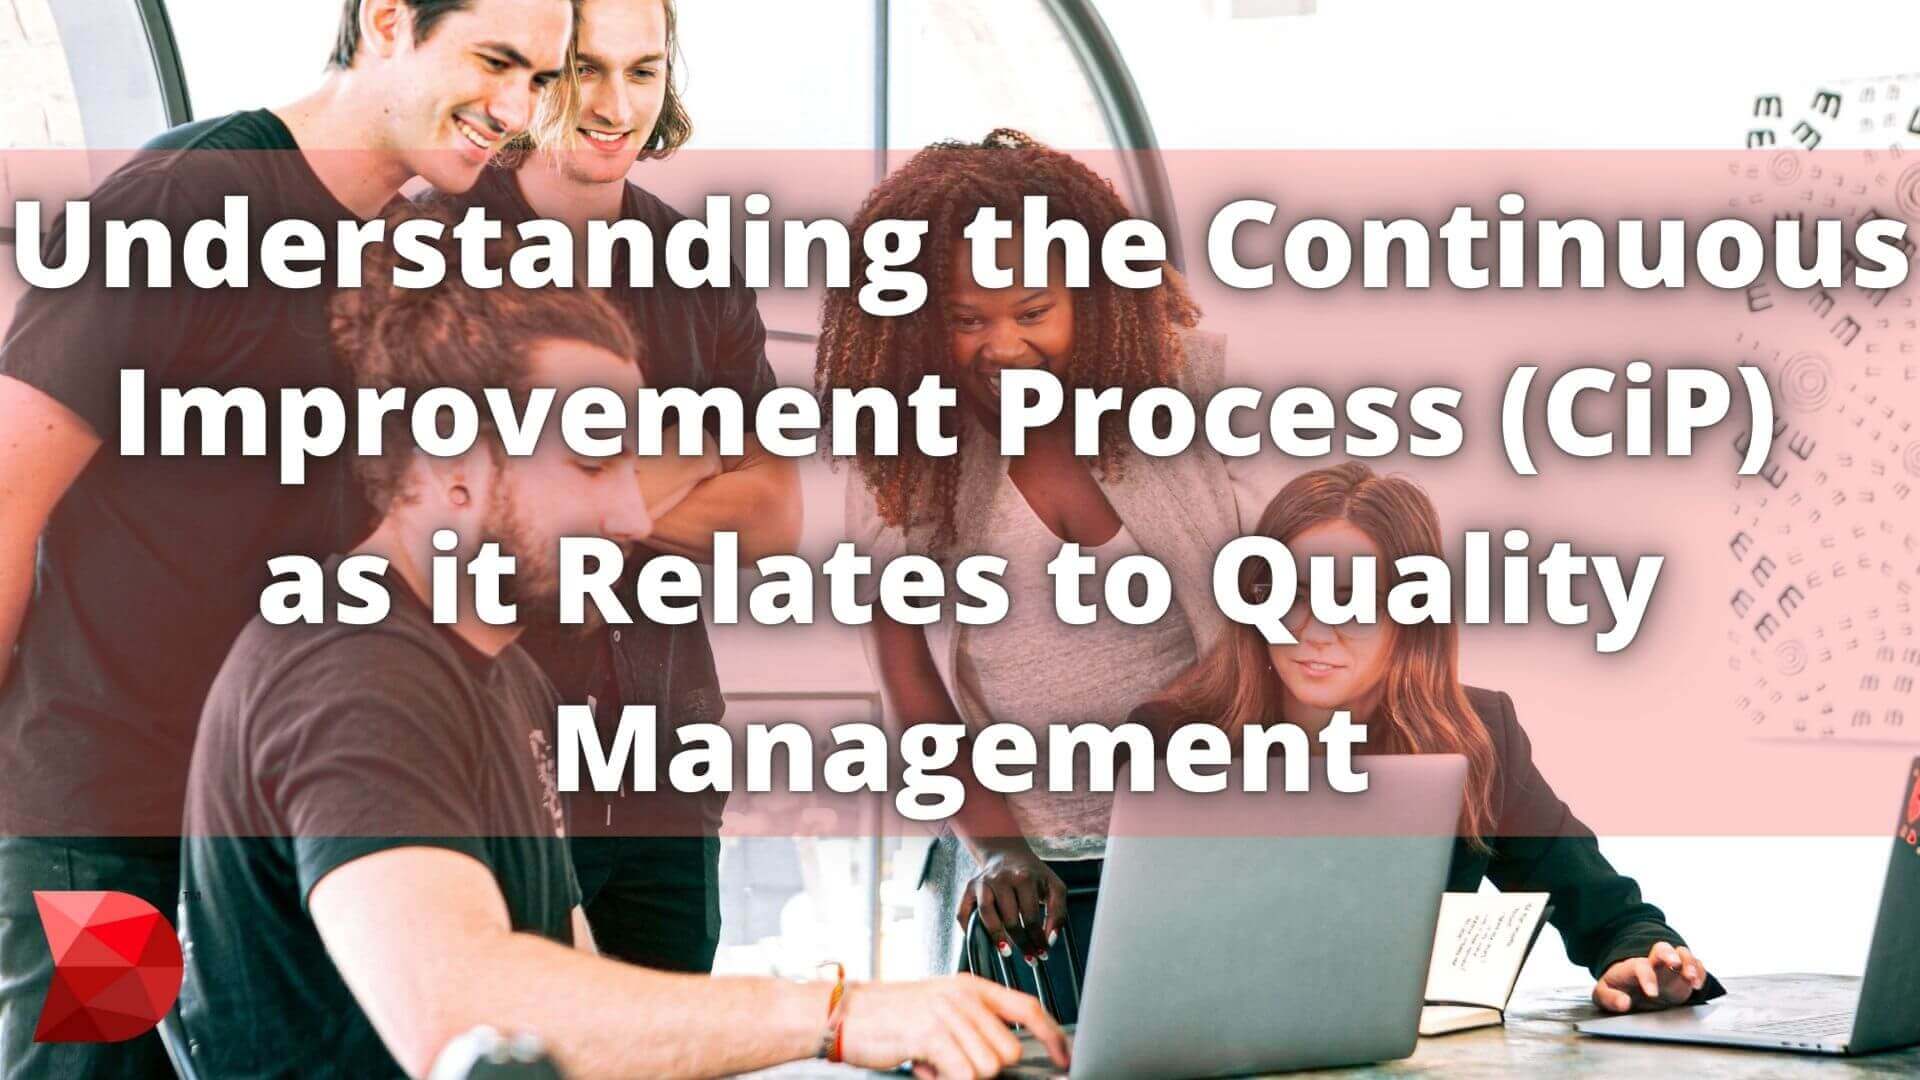 Understanding the Continuous Improvement Process (CiP) as it Relates to Quality Management